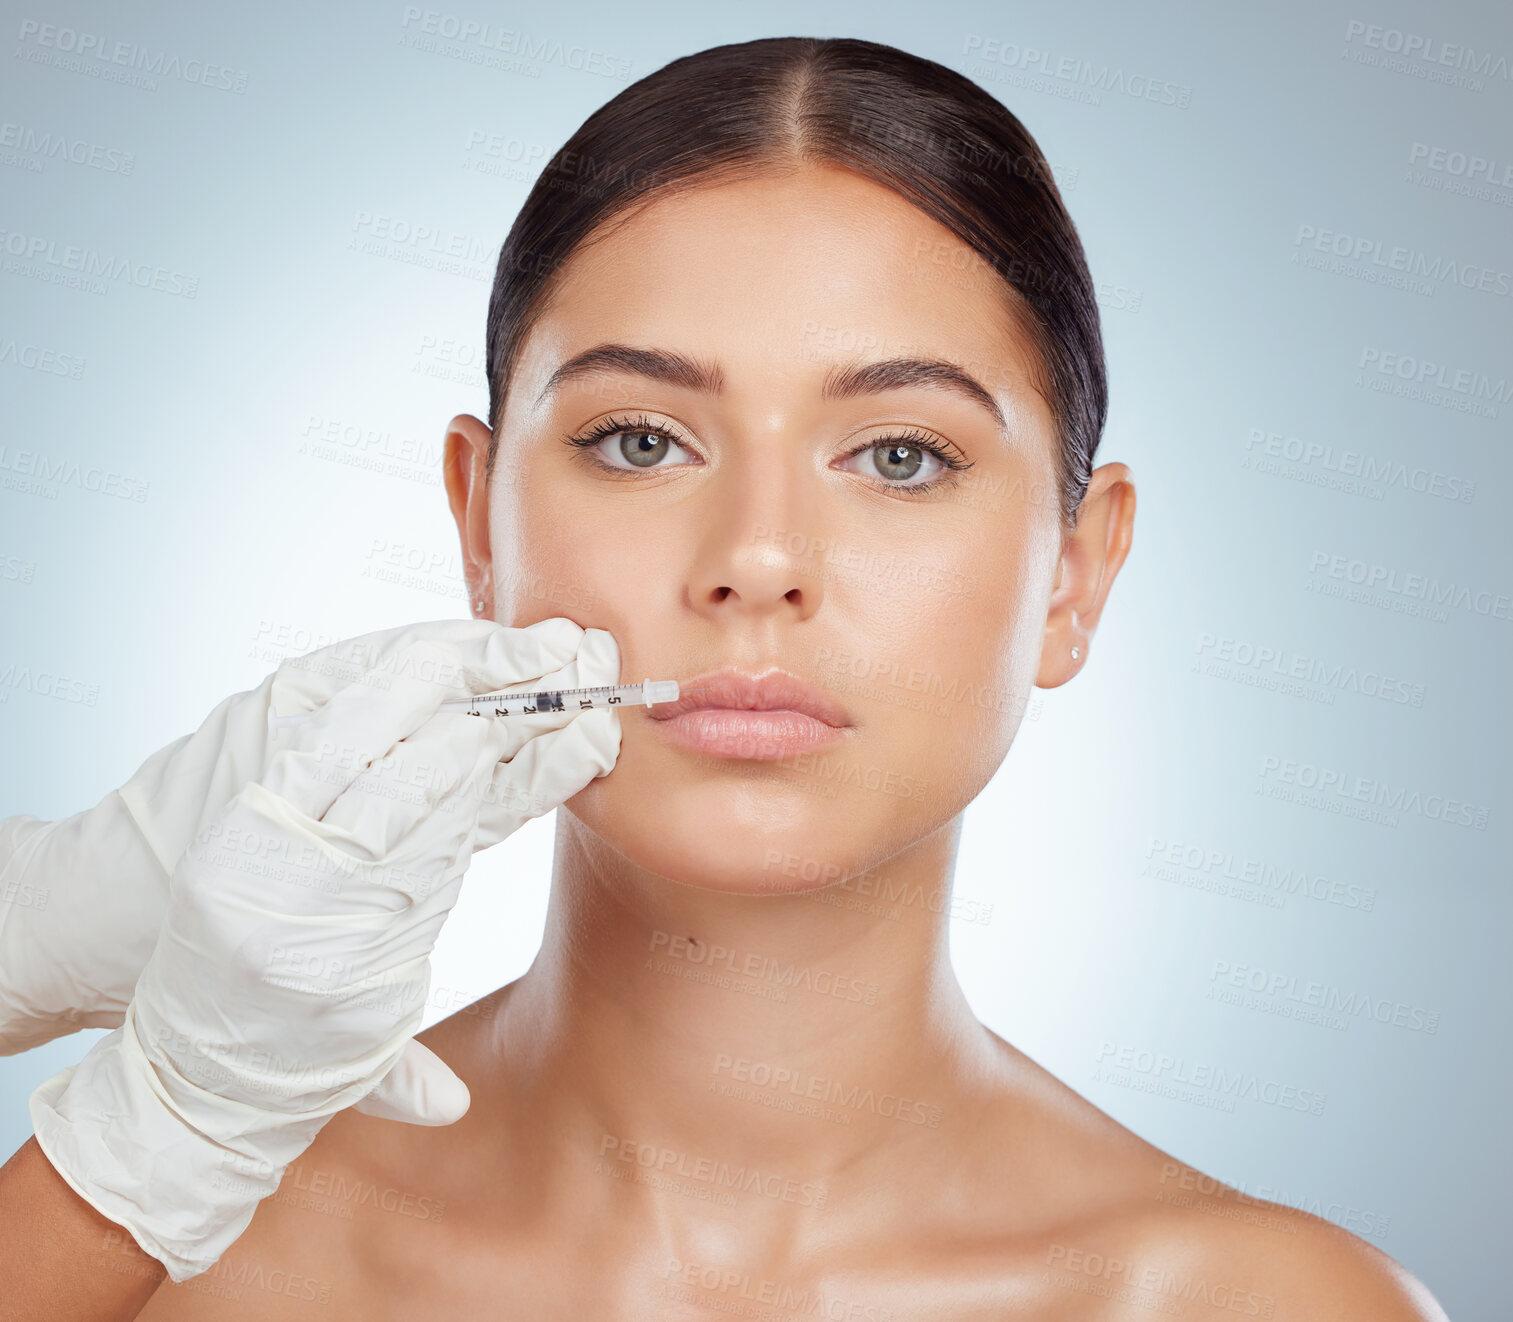 Buy stock photo Portrait of serious woman getting lip fillers or botox. Young caucasian model isolated against grey studio background with copyspace. Dermatologist injecting patient in anti ageing cosmetic procedure